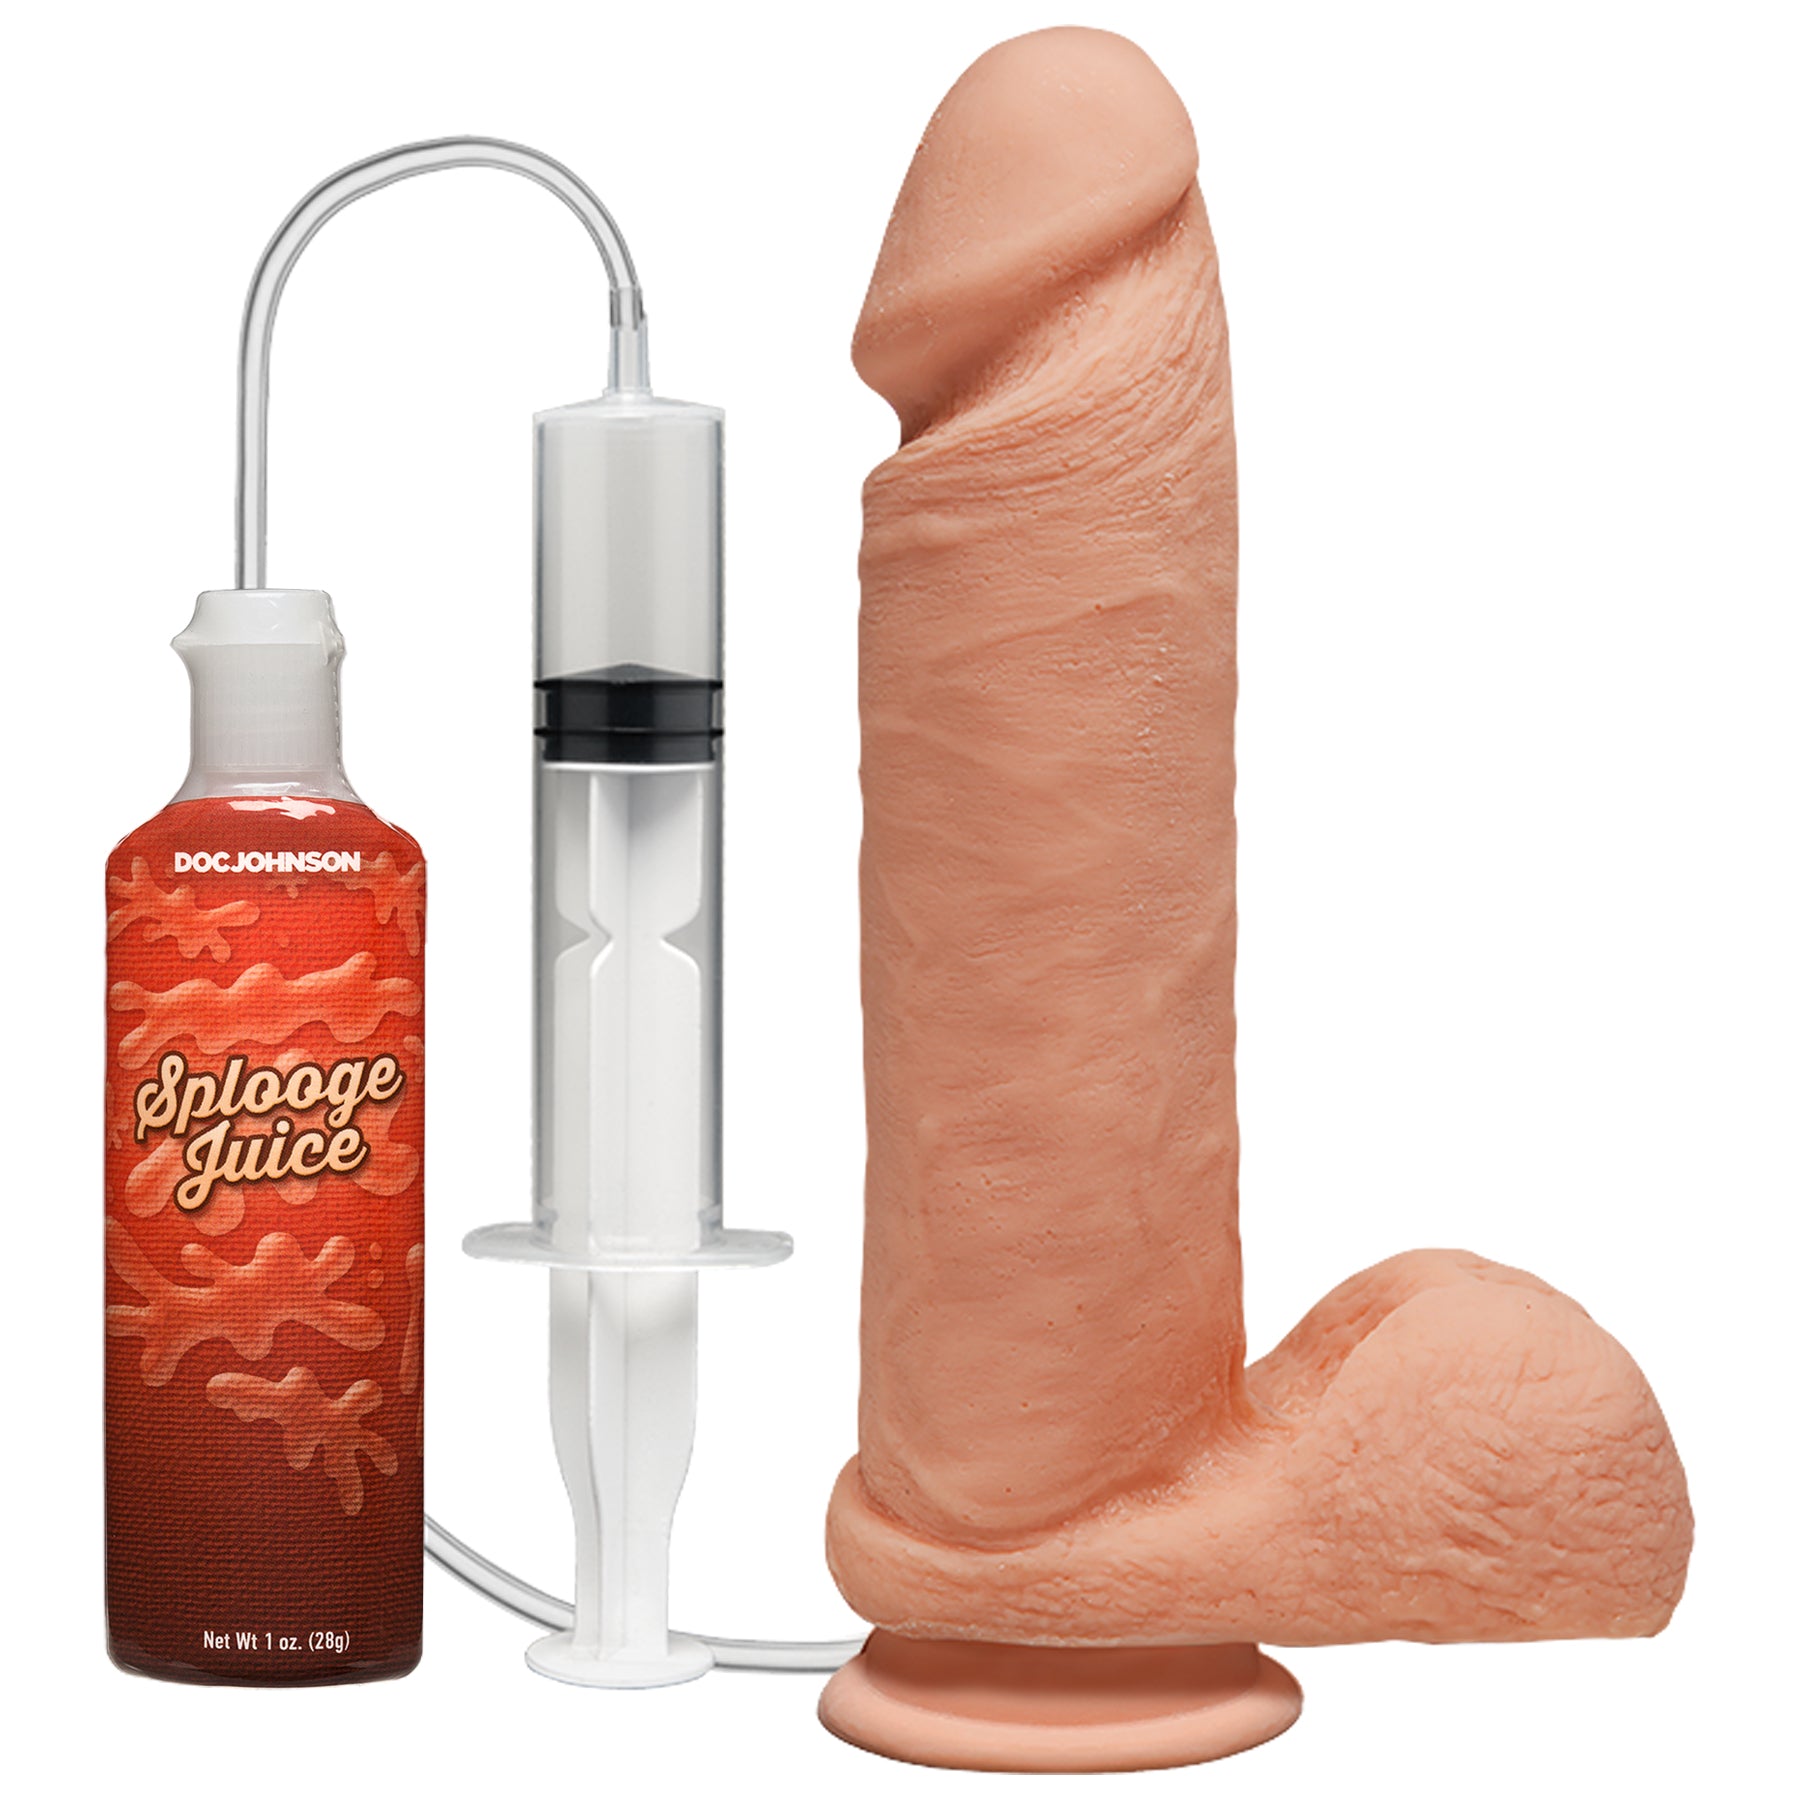 The D - Perfect D - Squirting Inch With Balls 8 Inch